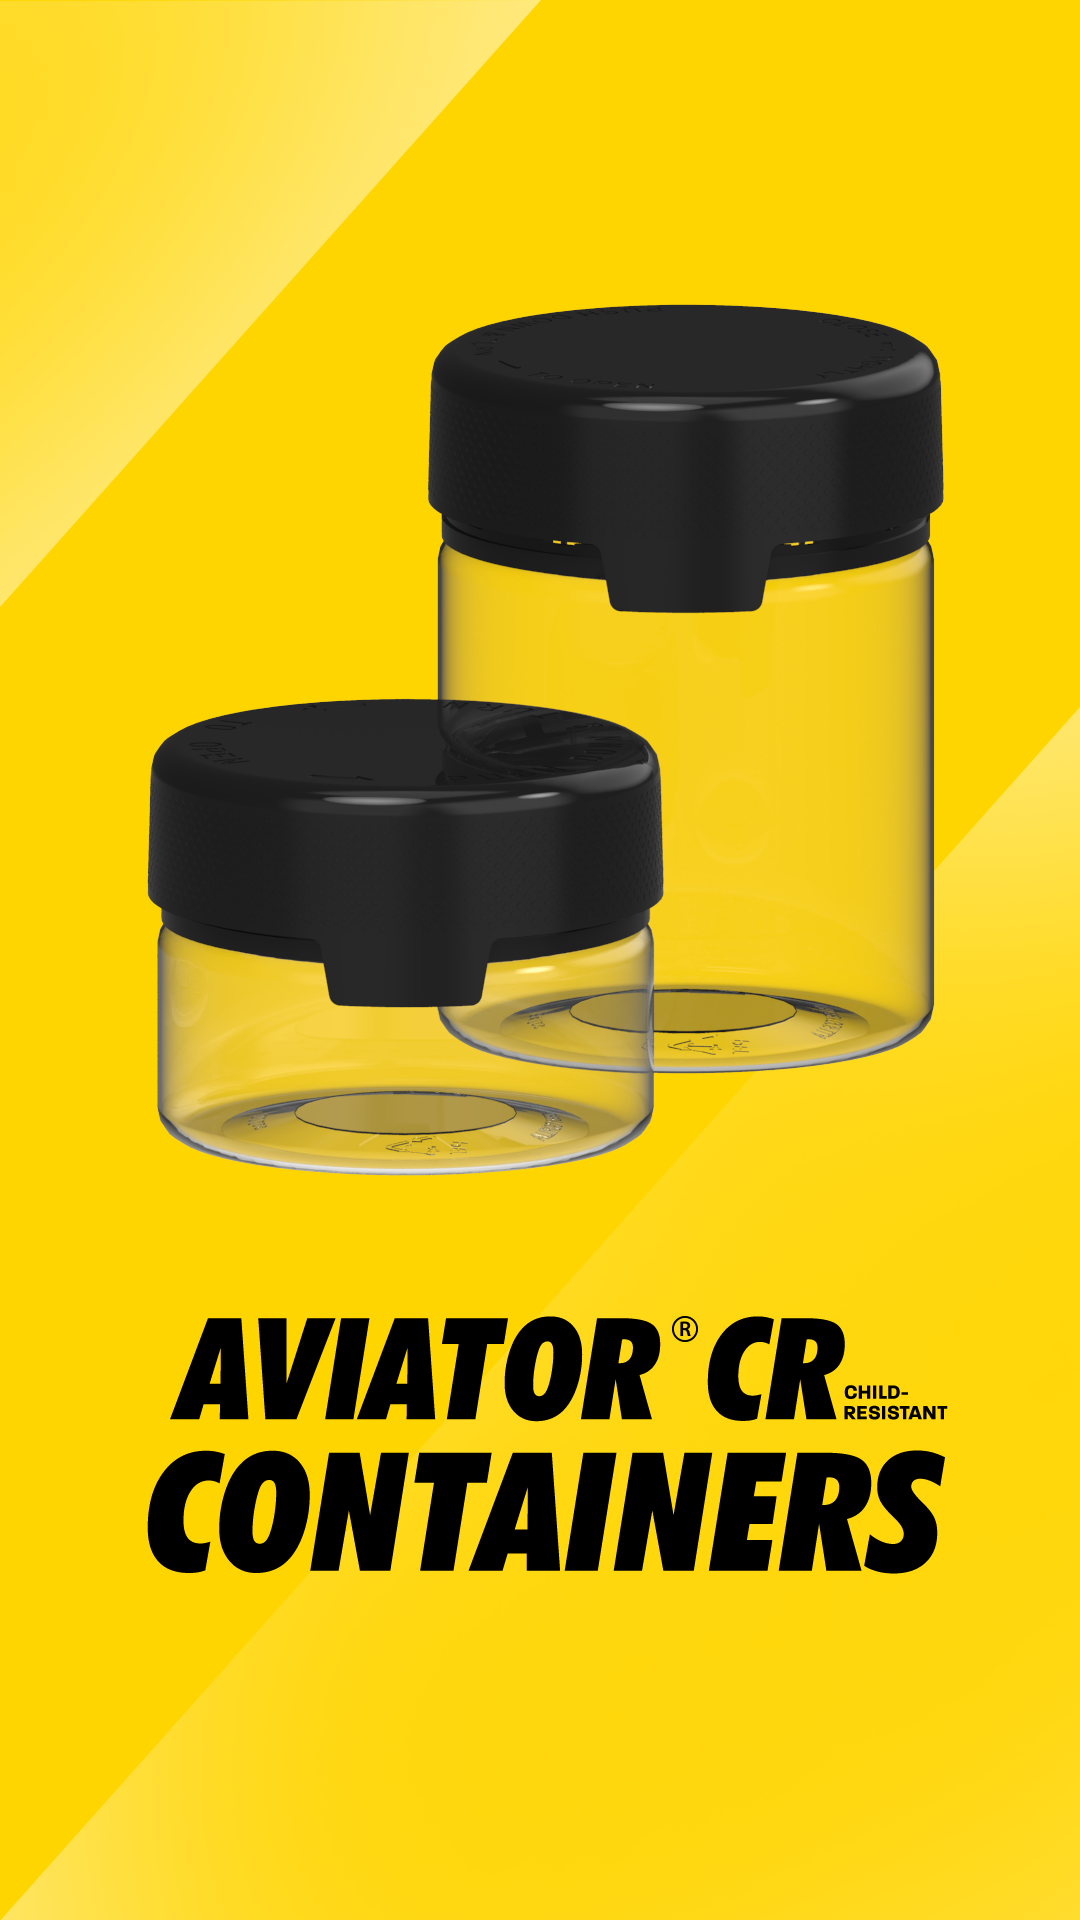 Aviator XL Containers